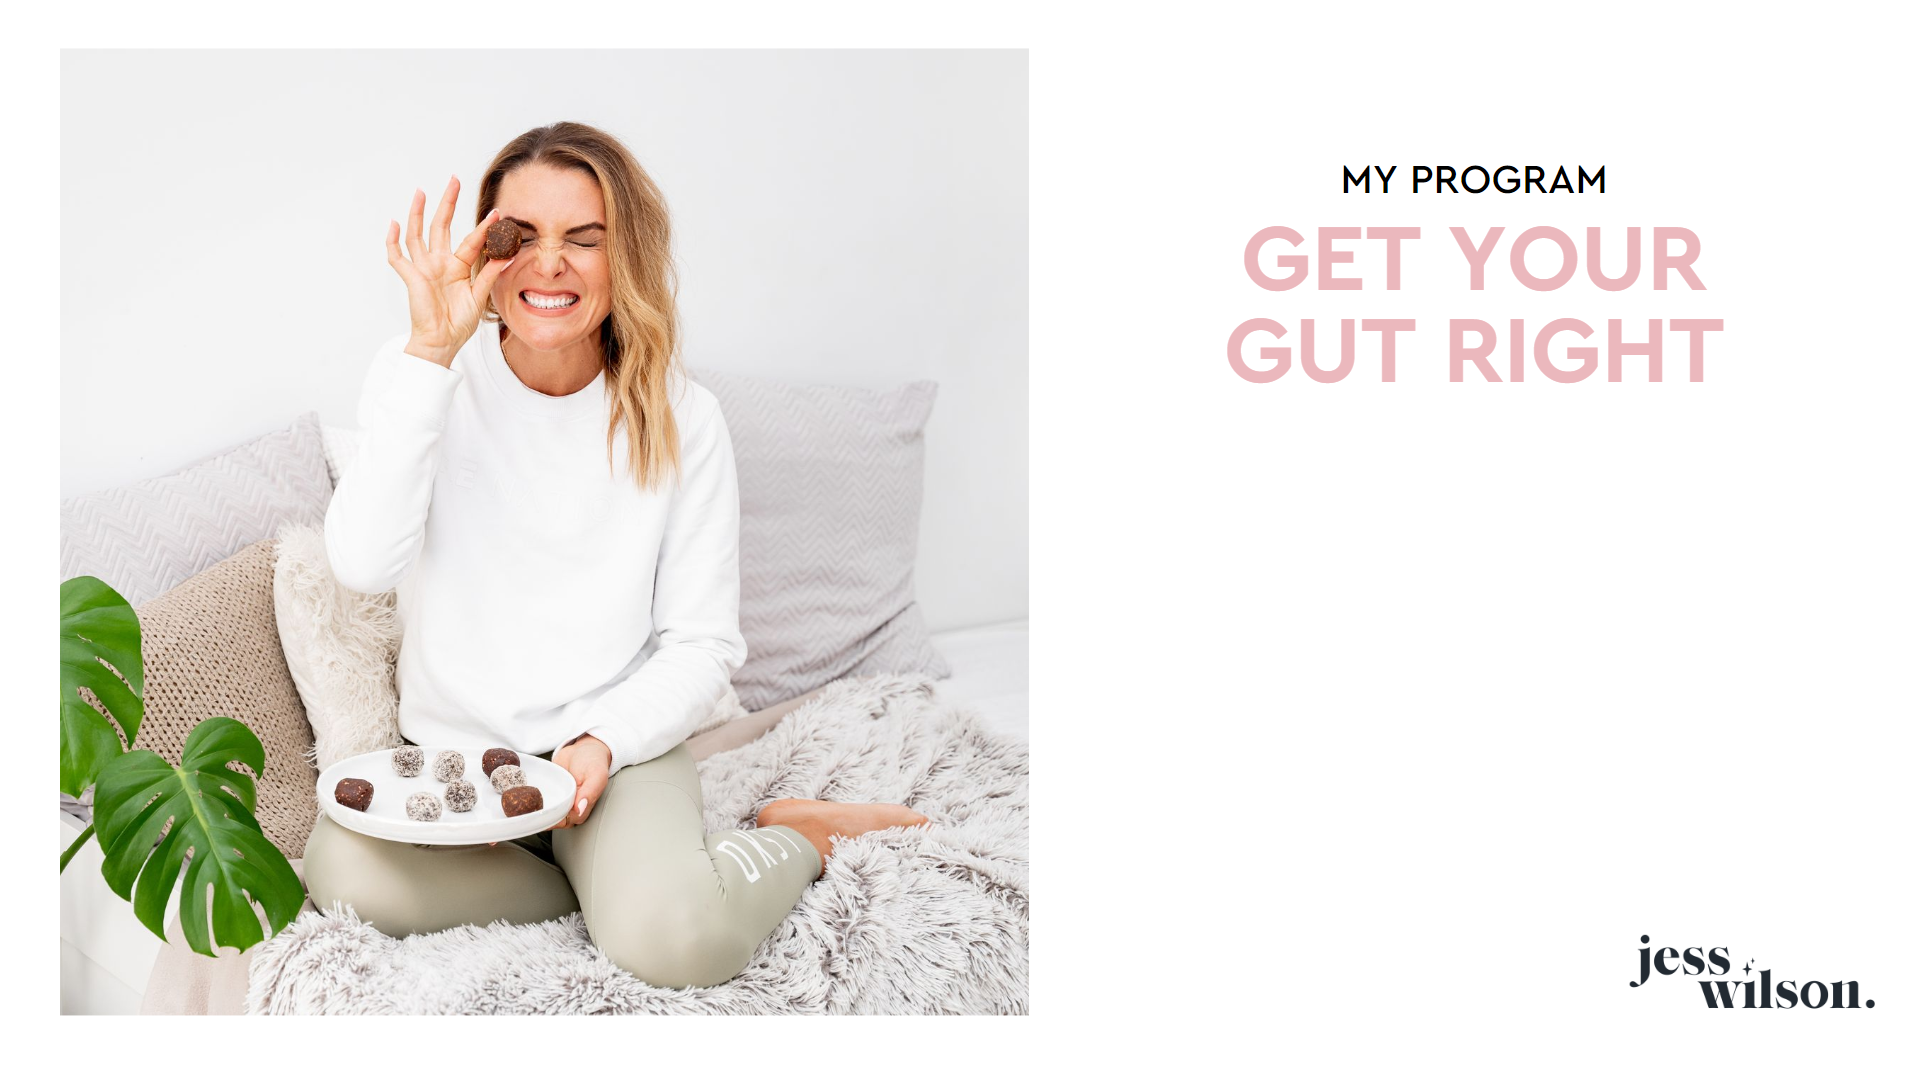 Get Your Gut Right Program